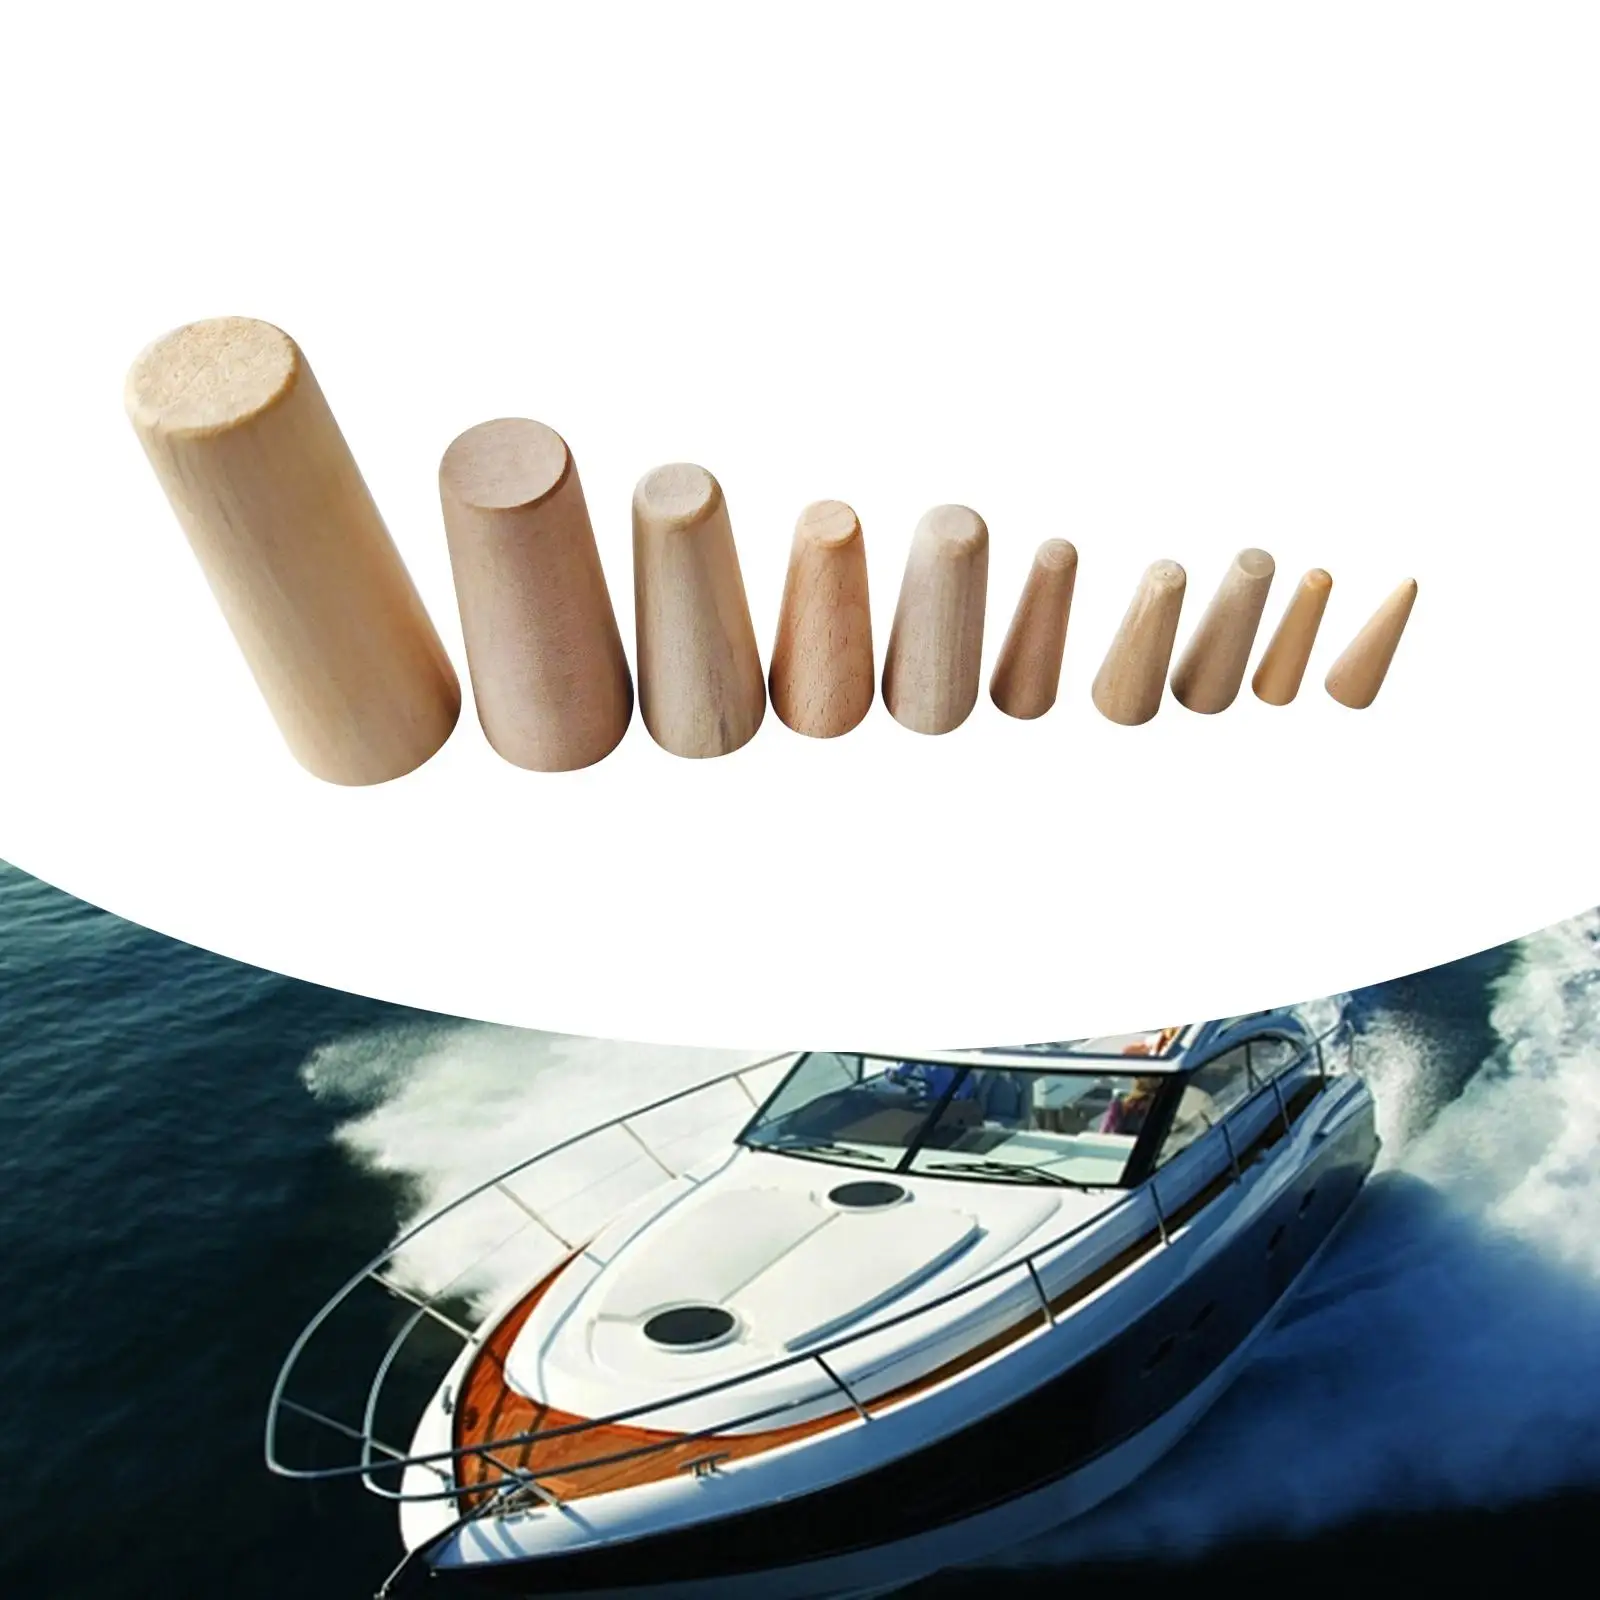 10Pcs Boat Emergency Wood Plugs Stopgap Stops Emergency Leaks Assorted Soft Conical Tapered Wooden Bungs for Marine Boat Pipes